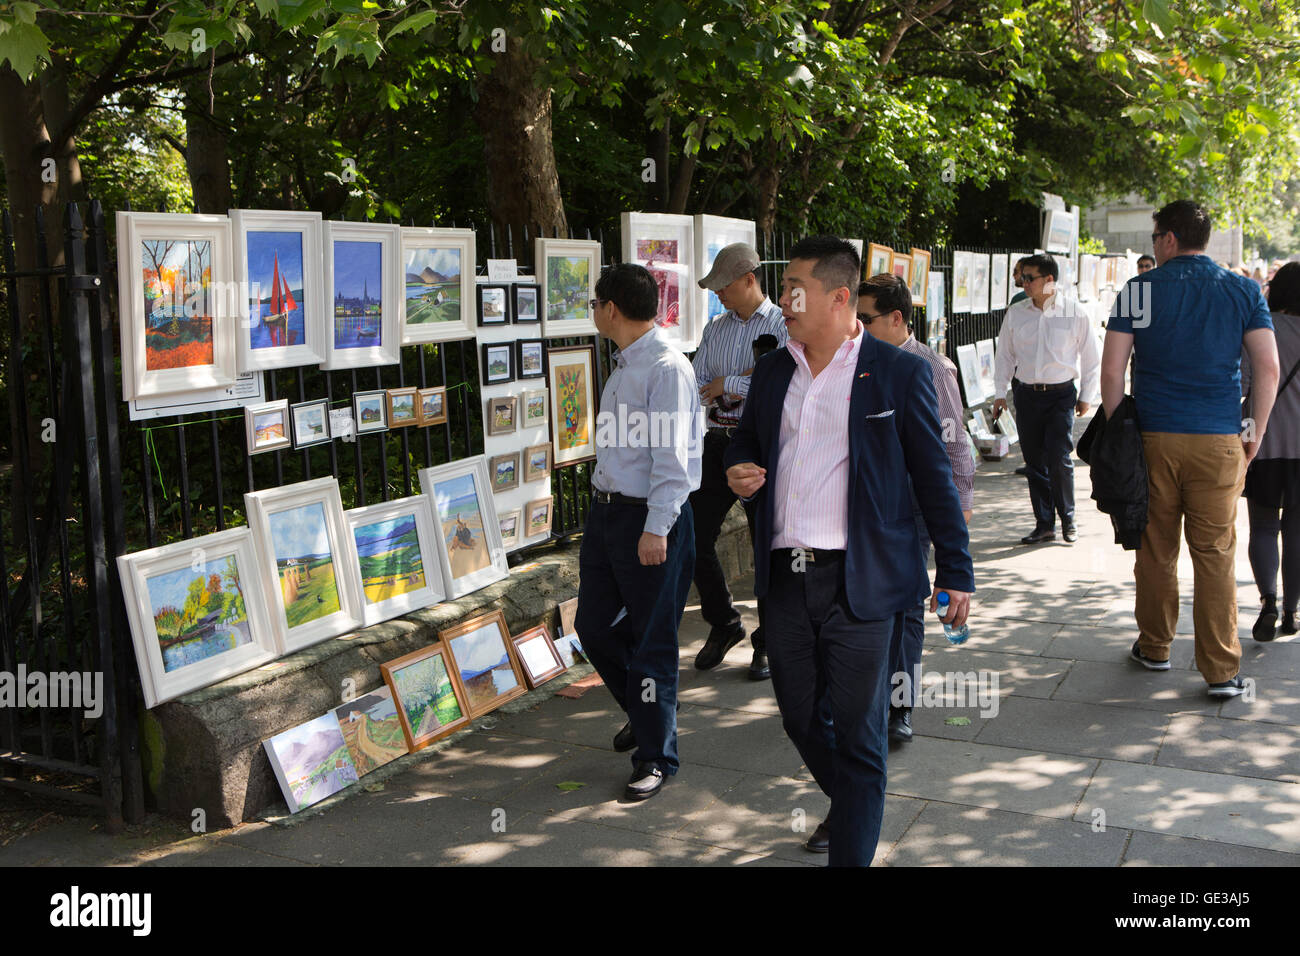 Ireland, Dublin, Merrion Square West, Sunday art market, Chinese tourists looking at paintings hanging on railings Stock Photo